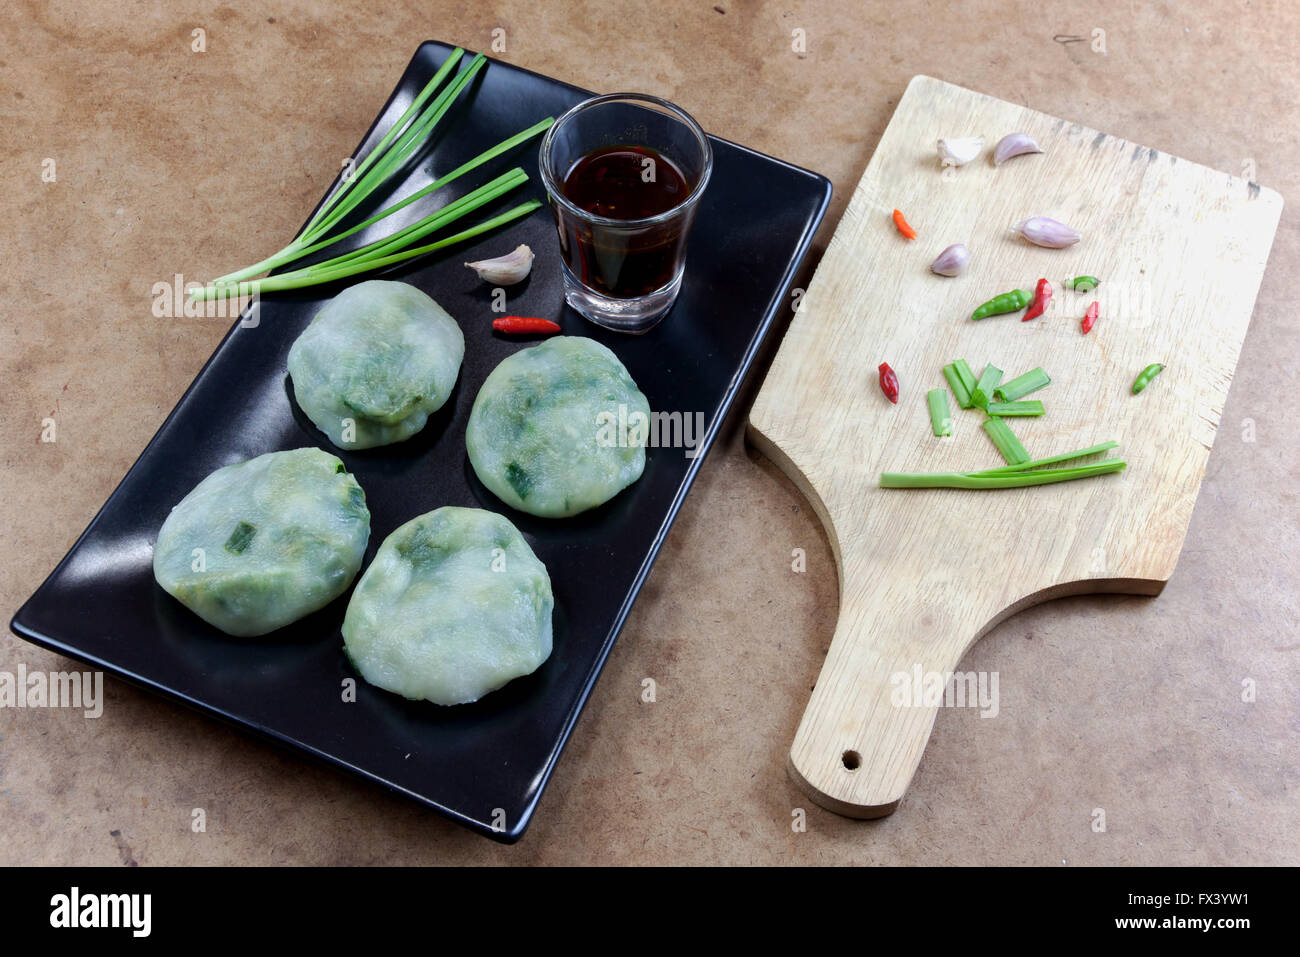 Allium tuberosum. Garlic chives with soy source. Dim sum is chinese cuisine. Stock Photo